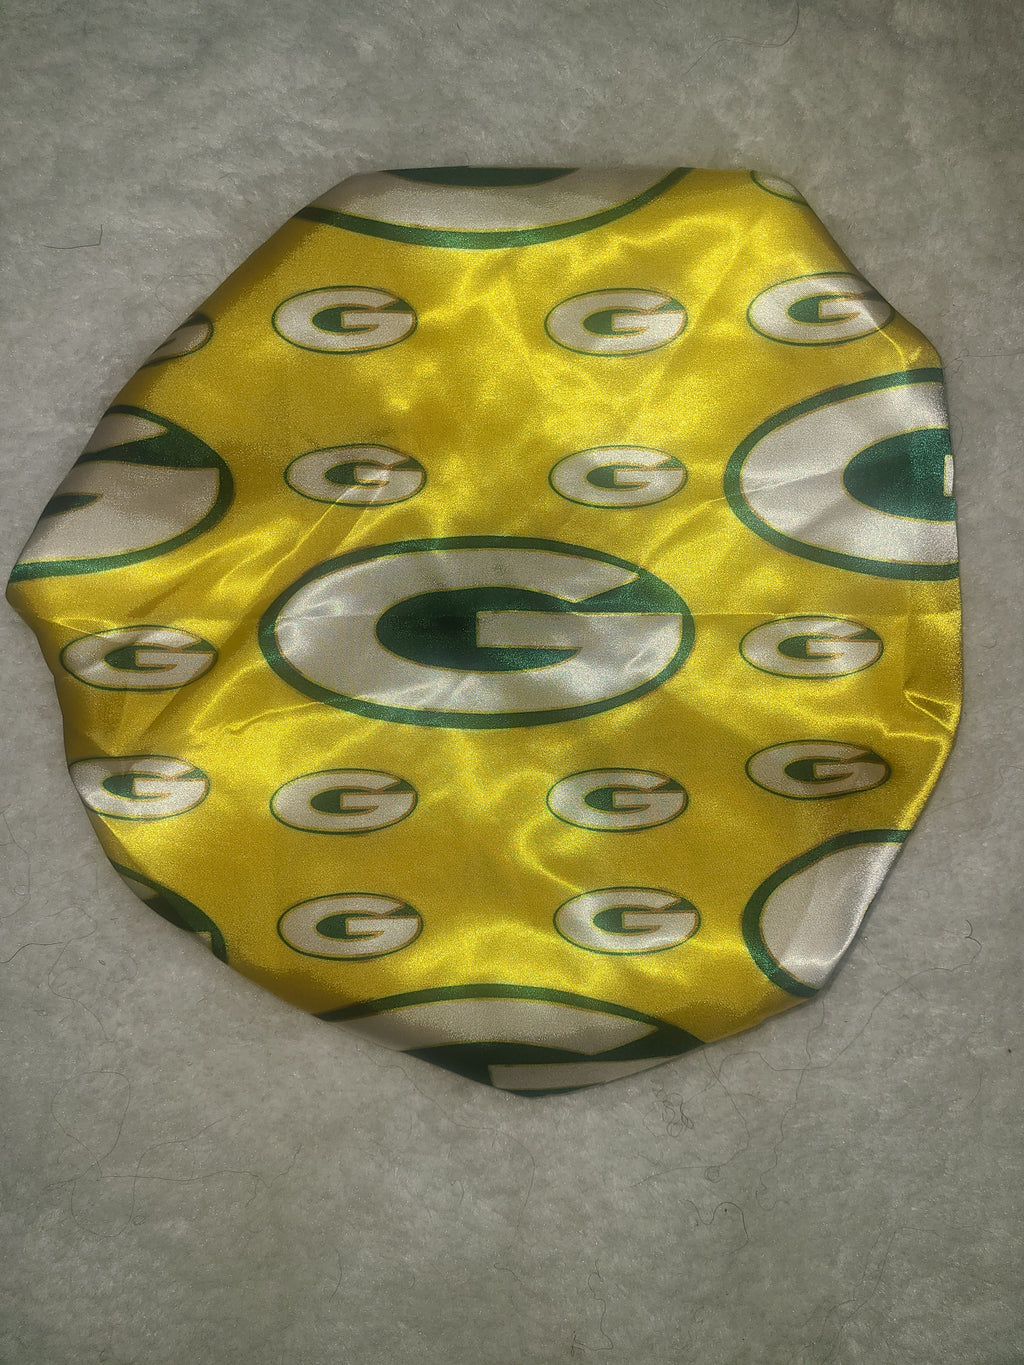 Green Bay Packers-Satin Bonnet & Braid Caps (Made to Order)